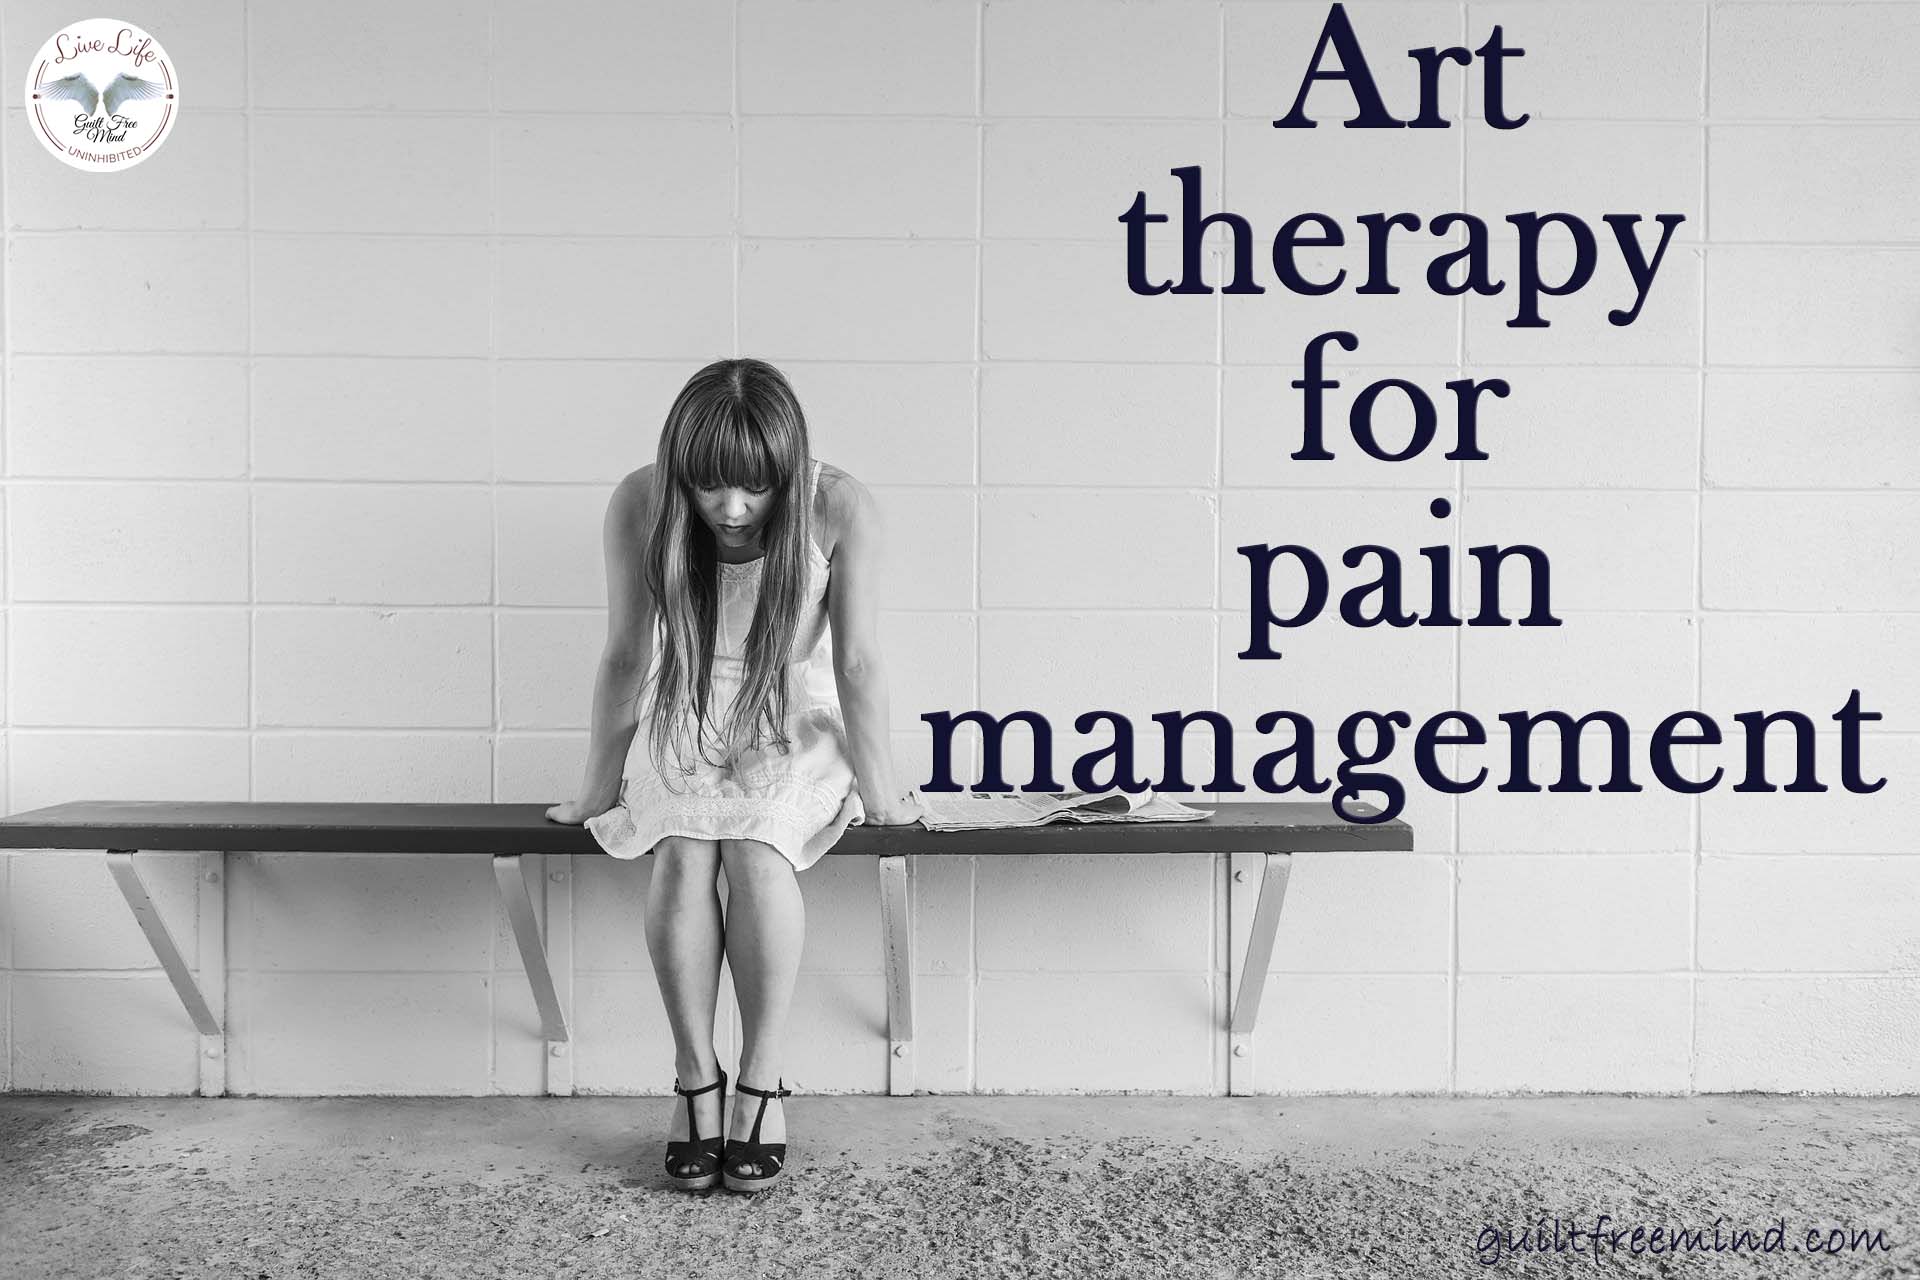 Art therapy for pain management.